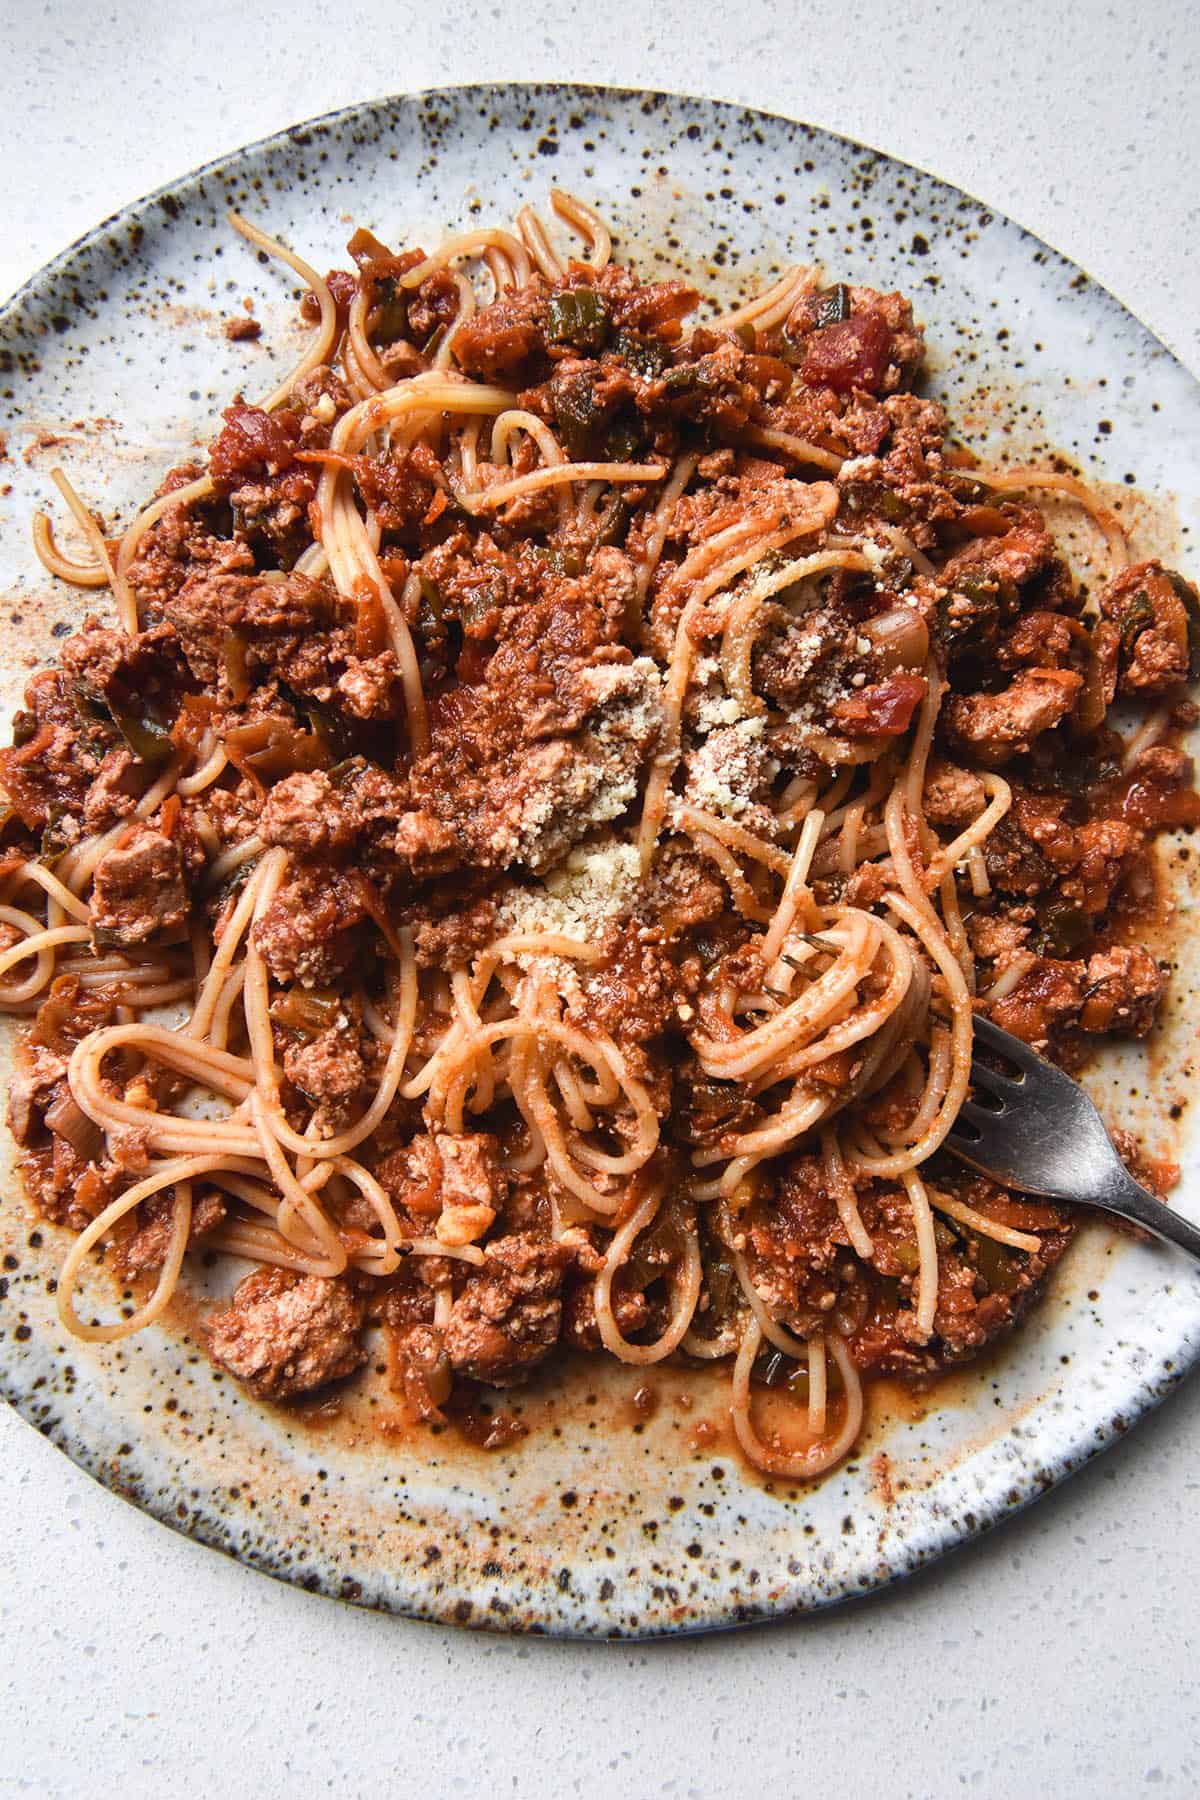 An aerial view of a white speckled ceramic plate topped with vegan spaghetti bolognese. A fork sticks into the bolognese from the bottom right of the image